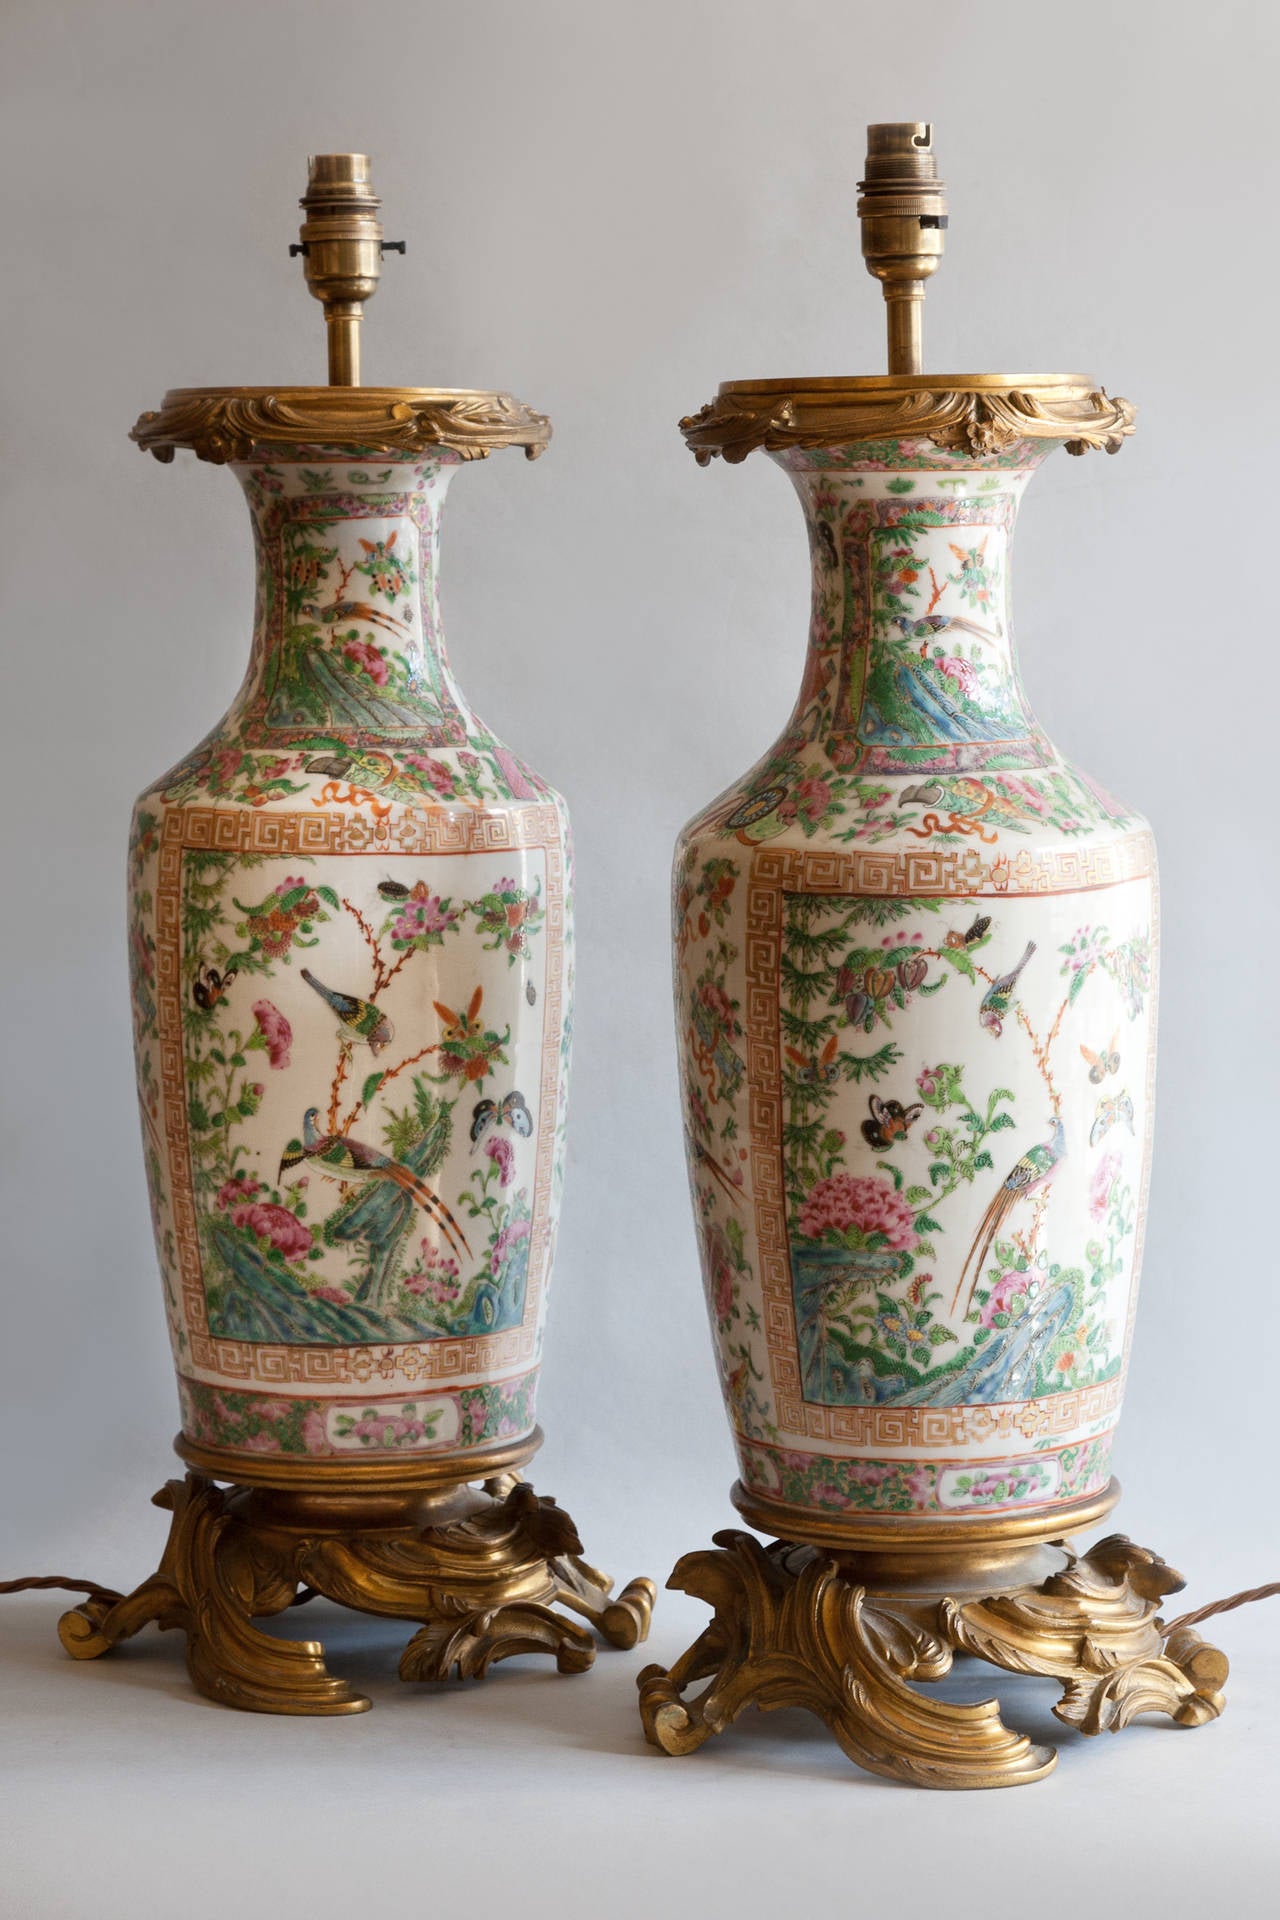 The vases of rouleau form with 'famille rose' decoration of birds and flowers in shades of greens and pinks on a white ground. With finely incised gilt bronze mounts. 

Shown with 22